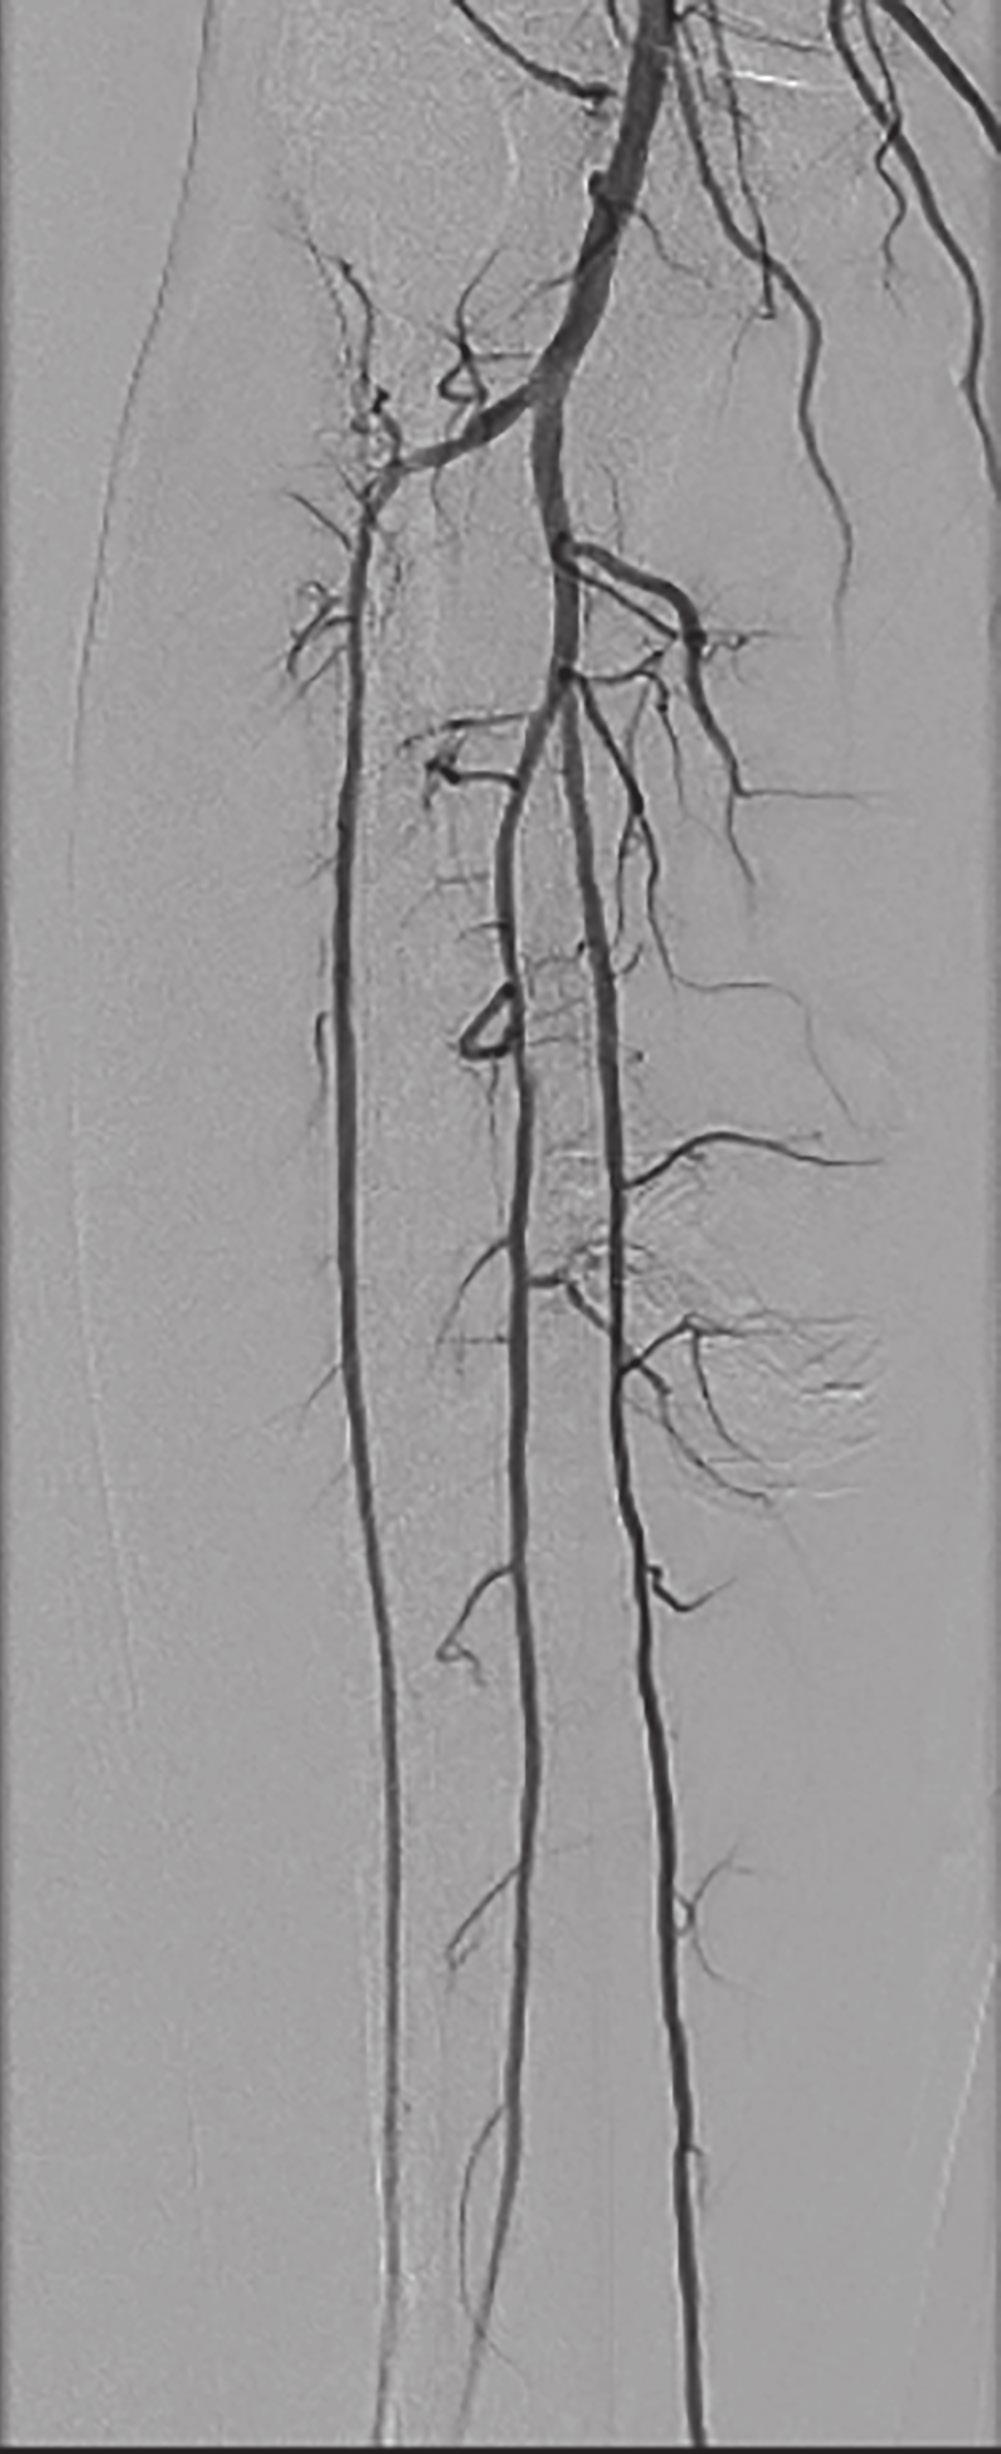 flow to acquire vascular imaging. The major advantage of this procedure is that no gadolinium is used for acquisition of angiographic imaging.